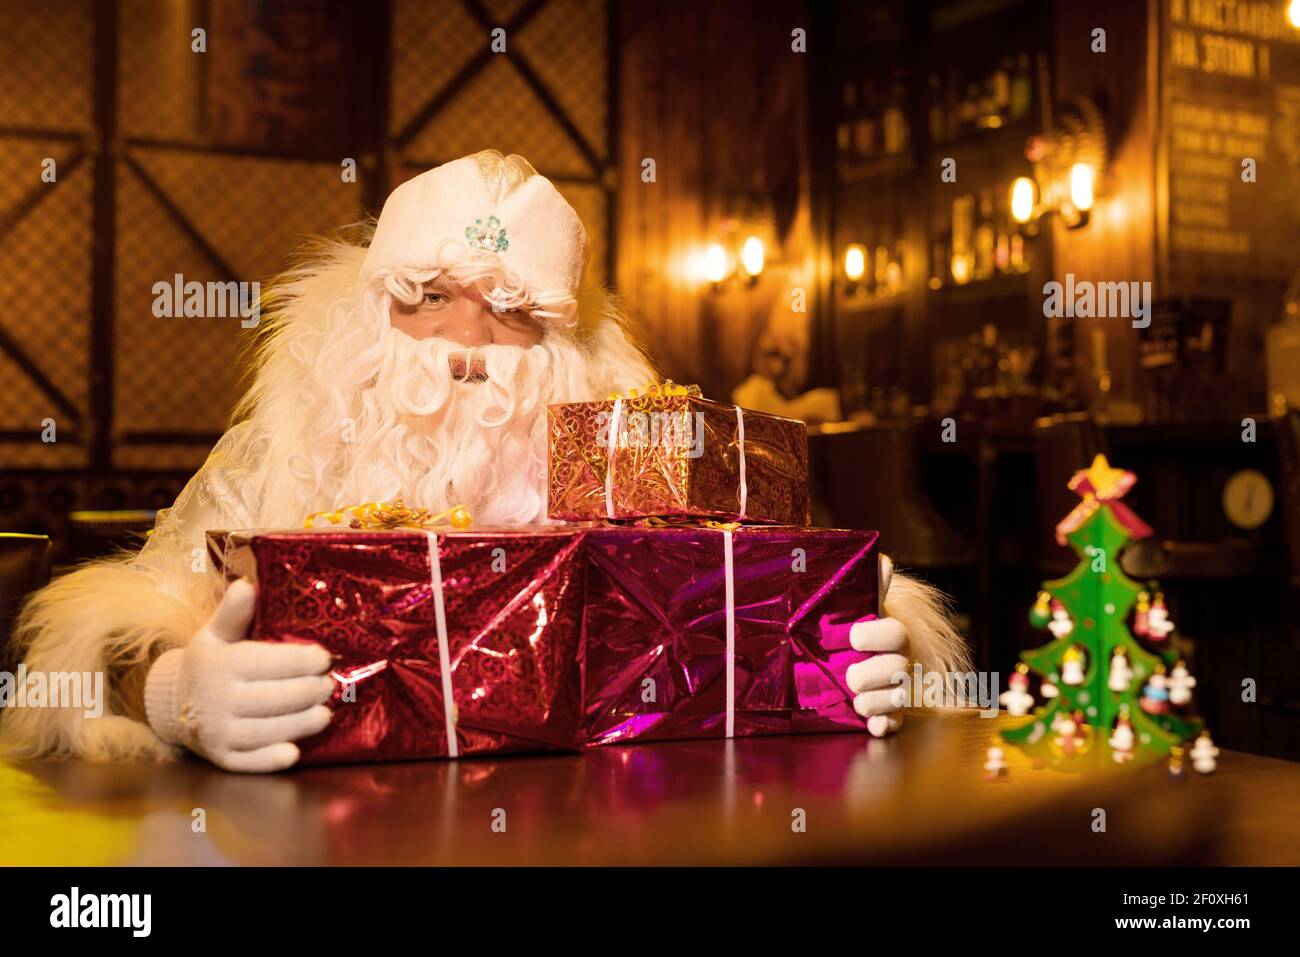 Santa Claus with pile of gifts in bar Stock Photo